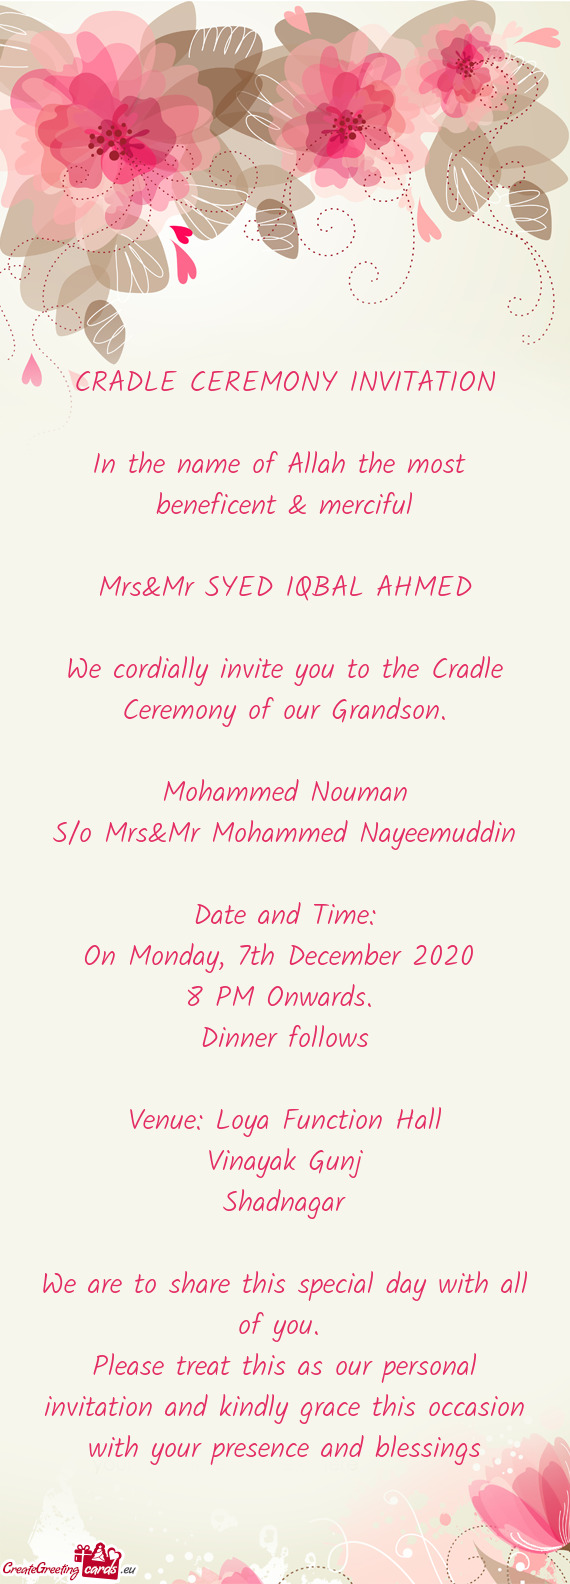 CRADLE CEREMONY INVITATION
 
 In the name of Allah the most 
 beneficent & merciful
 
 Mrs&Mr SYED I